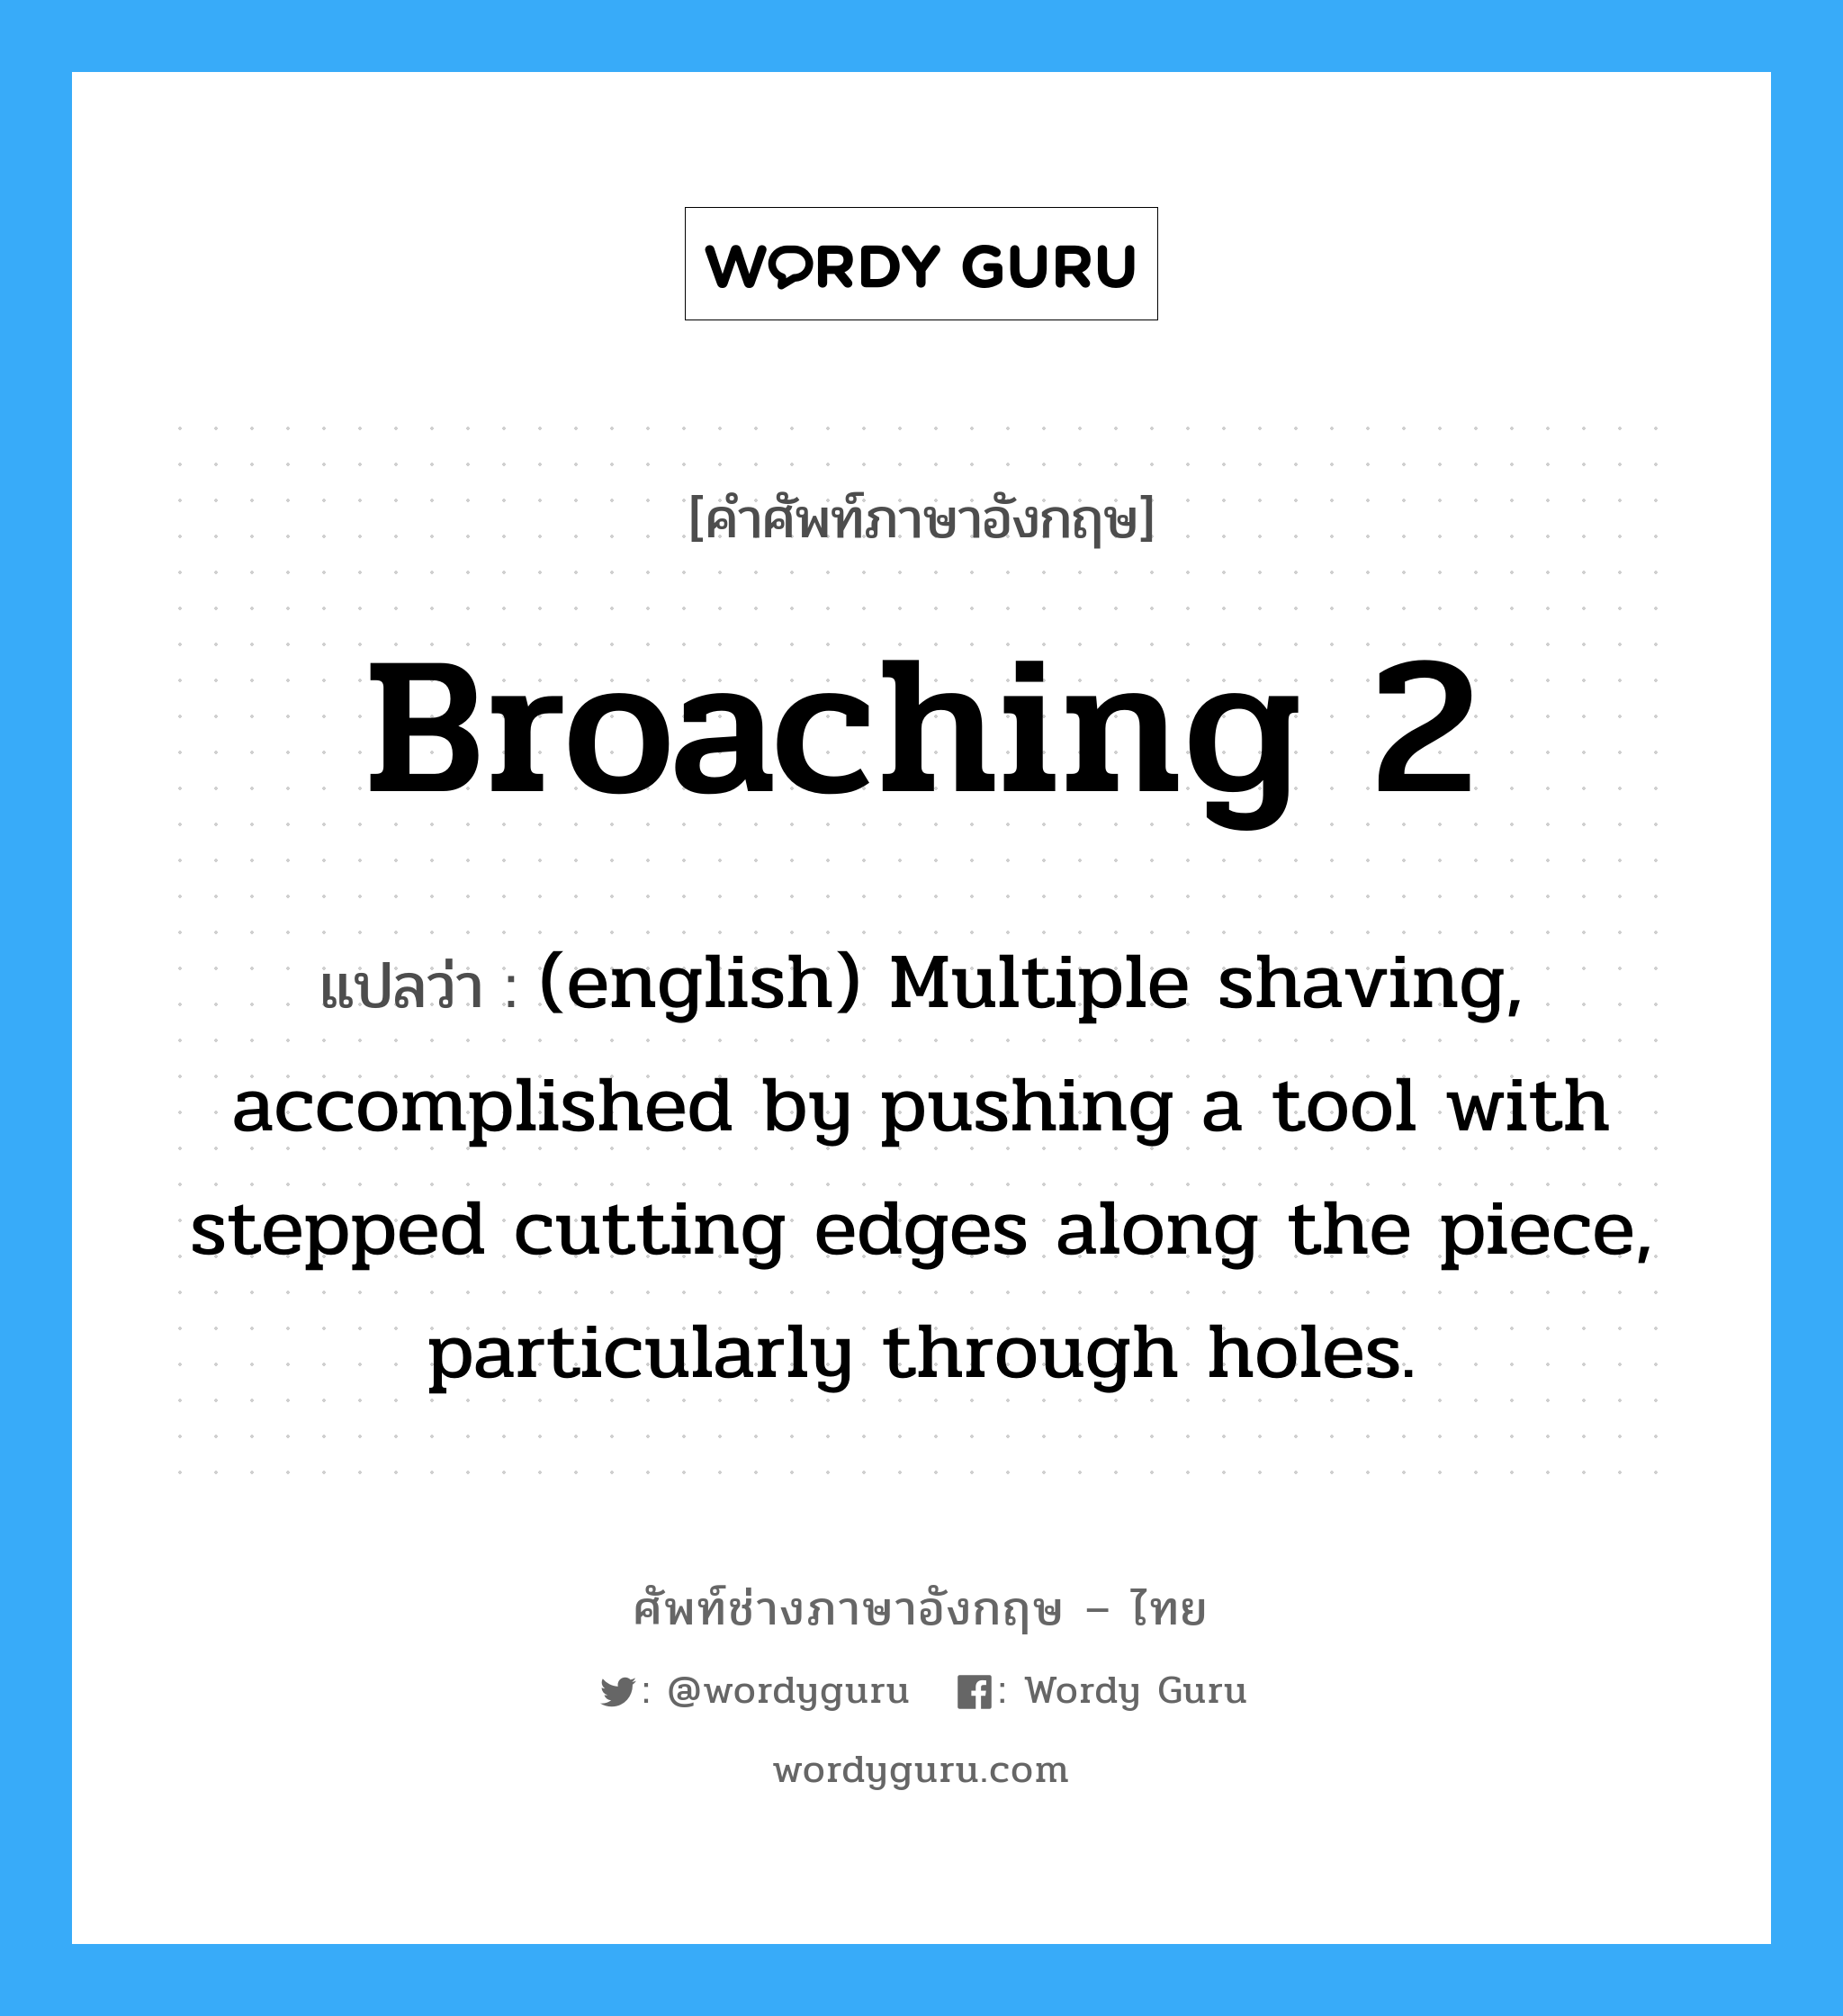 Broaching 2 แปลว่า?, คำศัพท์ช่างภาษาอังกฤษ - ไทย Broaching 2 คำศัพท์ภาษาอังกฤษ Broaching 2 แปลว่า (english) Multiple shaving, accomplished by pushing a tool with stepped cutting edges along the piece, particularly through holes.